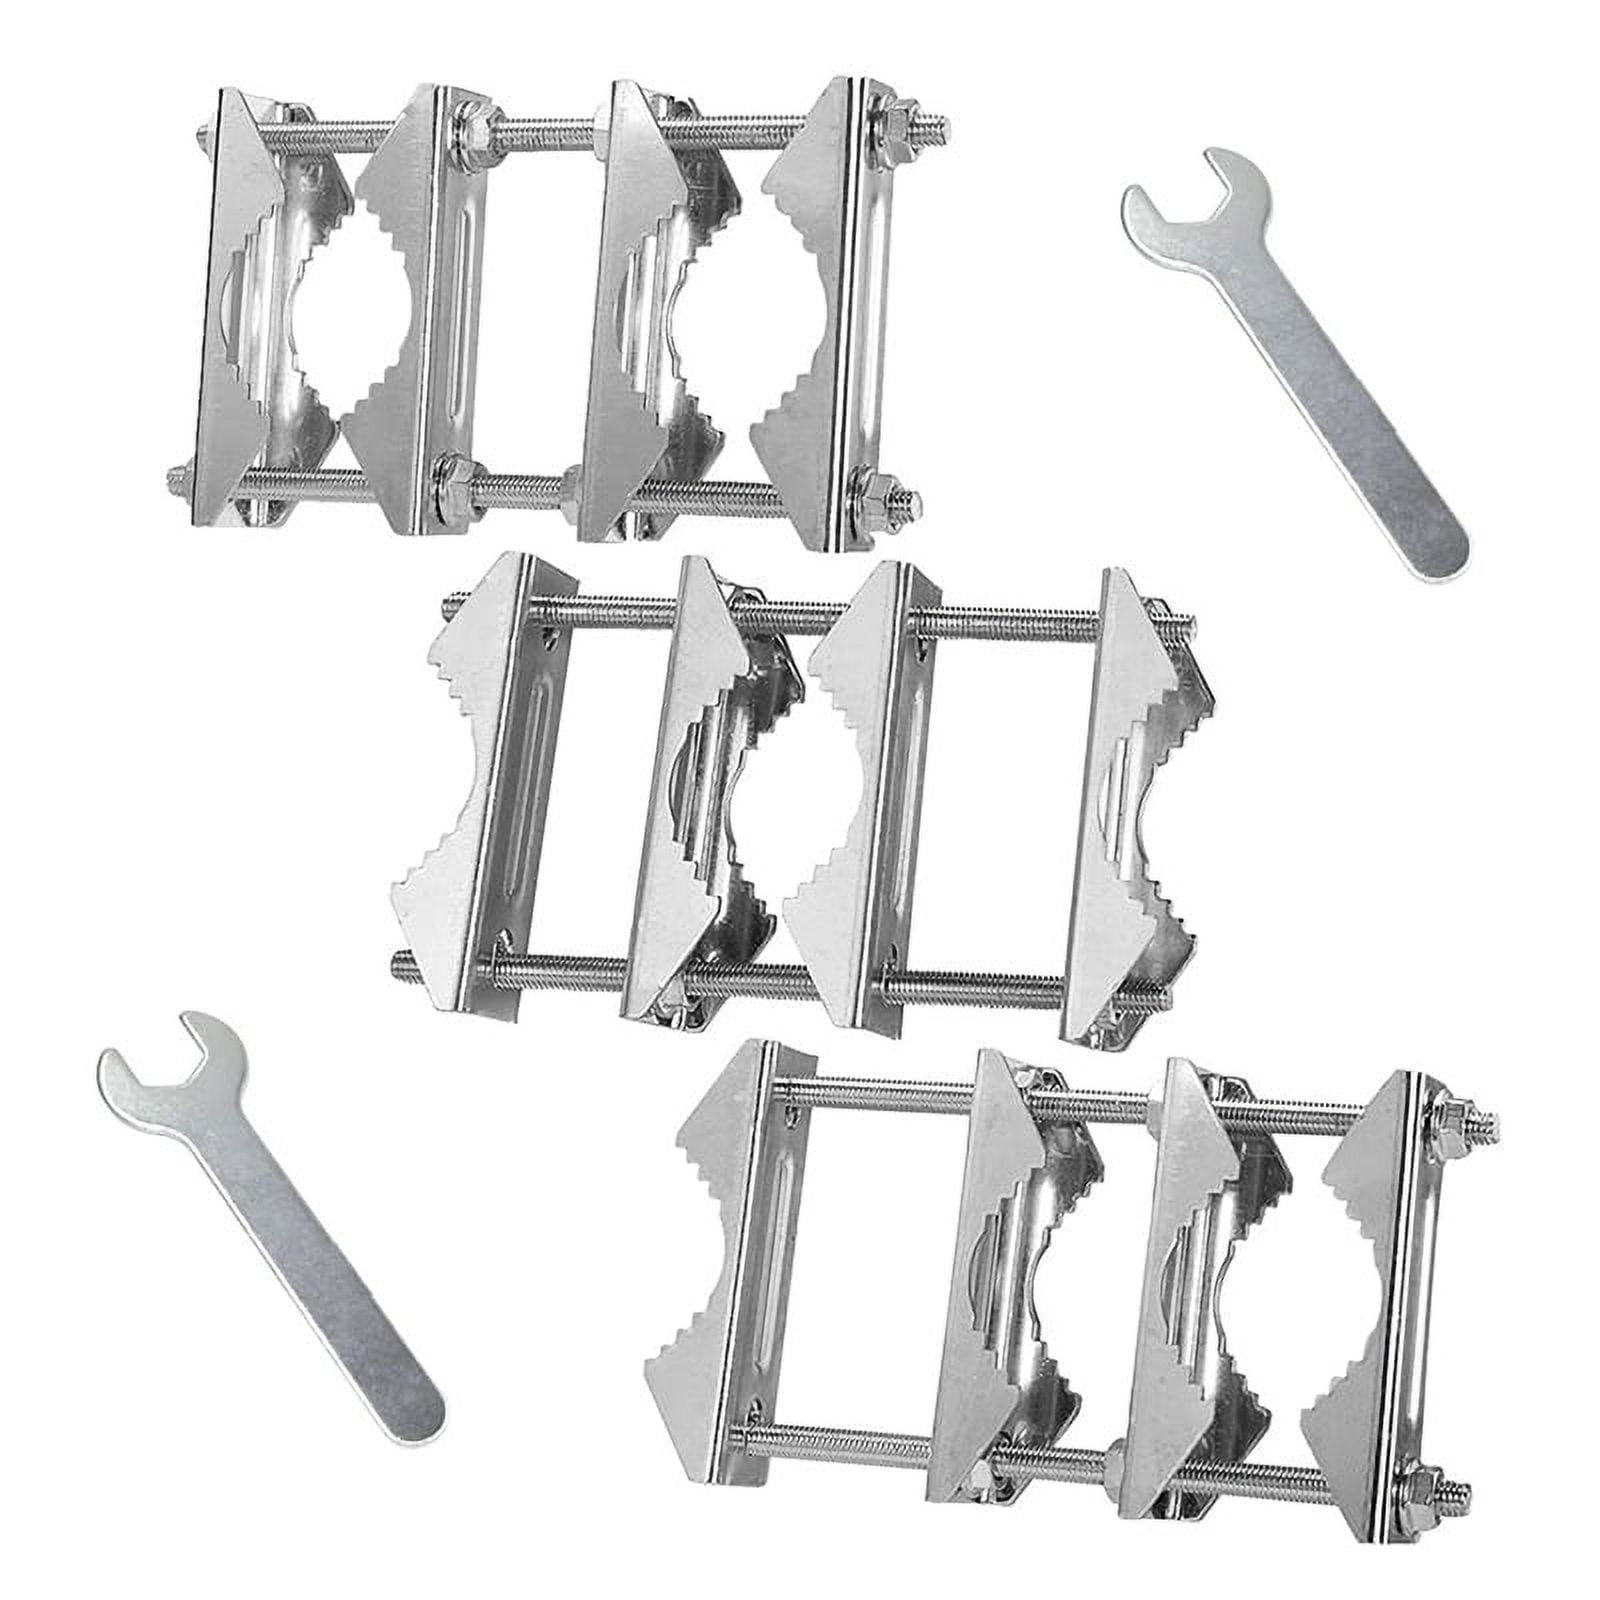 2 Pack Double Antenna Mast Clamp V Jaw Block 304 Stainless Steel TV Double Antenna Pole Holder Heavy Duty Pole to Pole Mounting Hardware Kit Bracket H